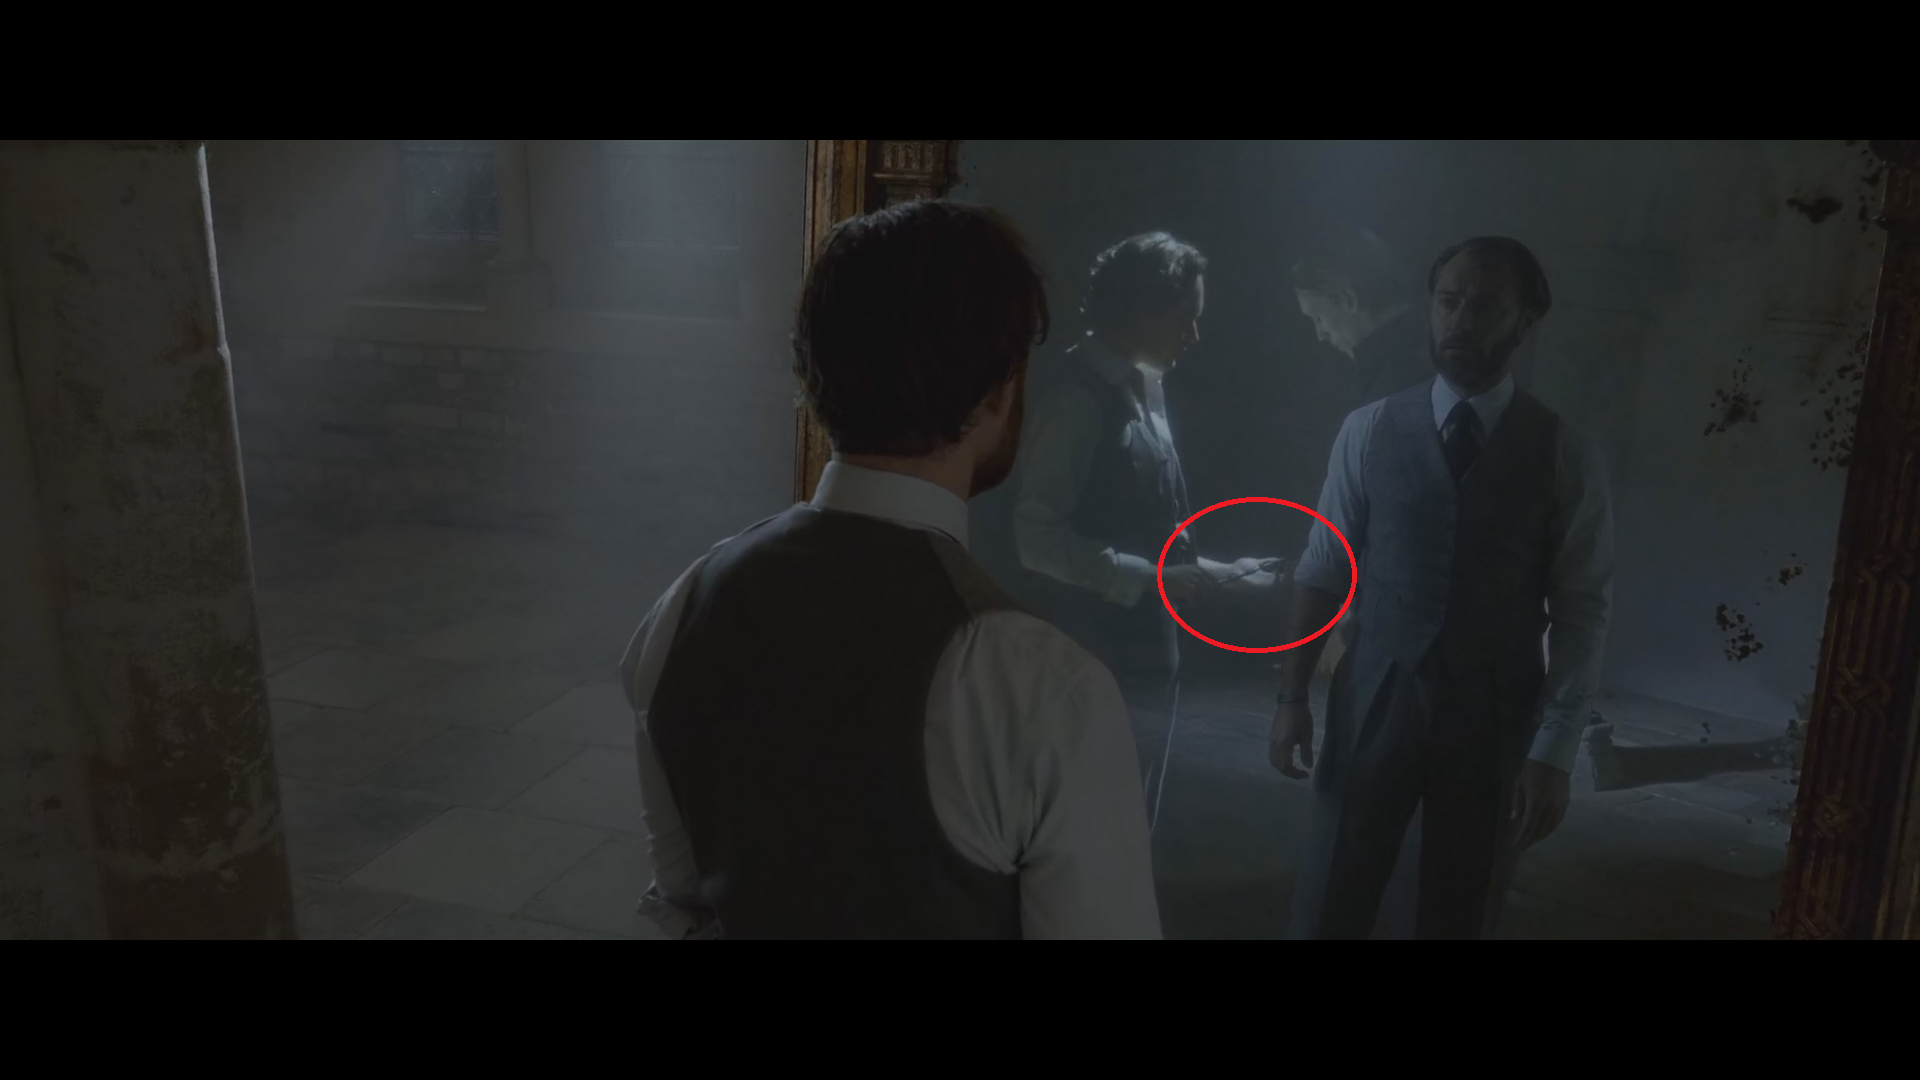 Wait, is Albus holding the Elder Wand?